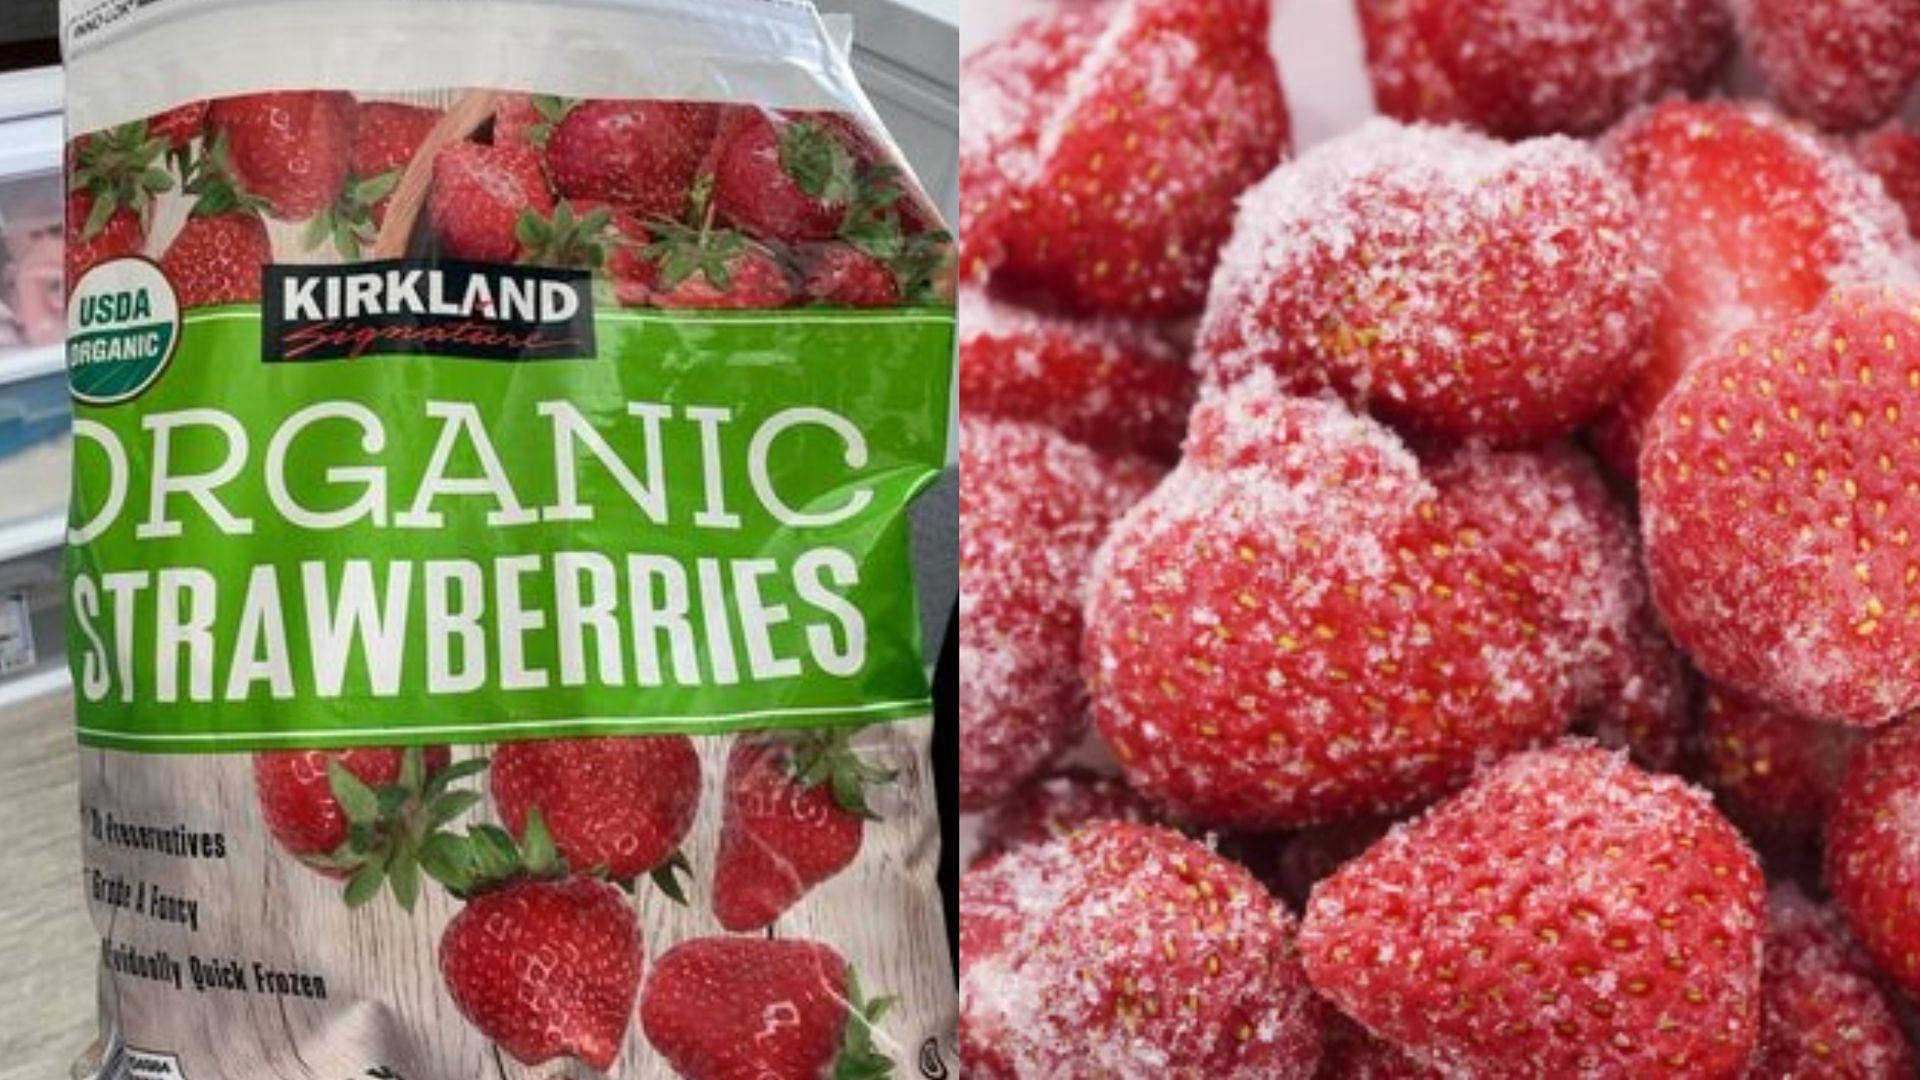 Frozen fruits sold at Costco stores are recalled due to hepatitis A concerns (Image via world.foodfacts.org, Shutterstock)